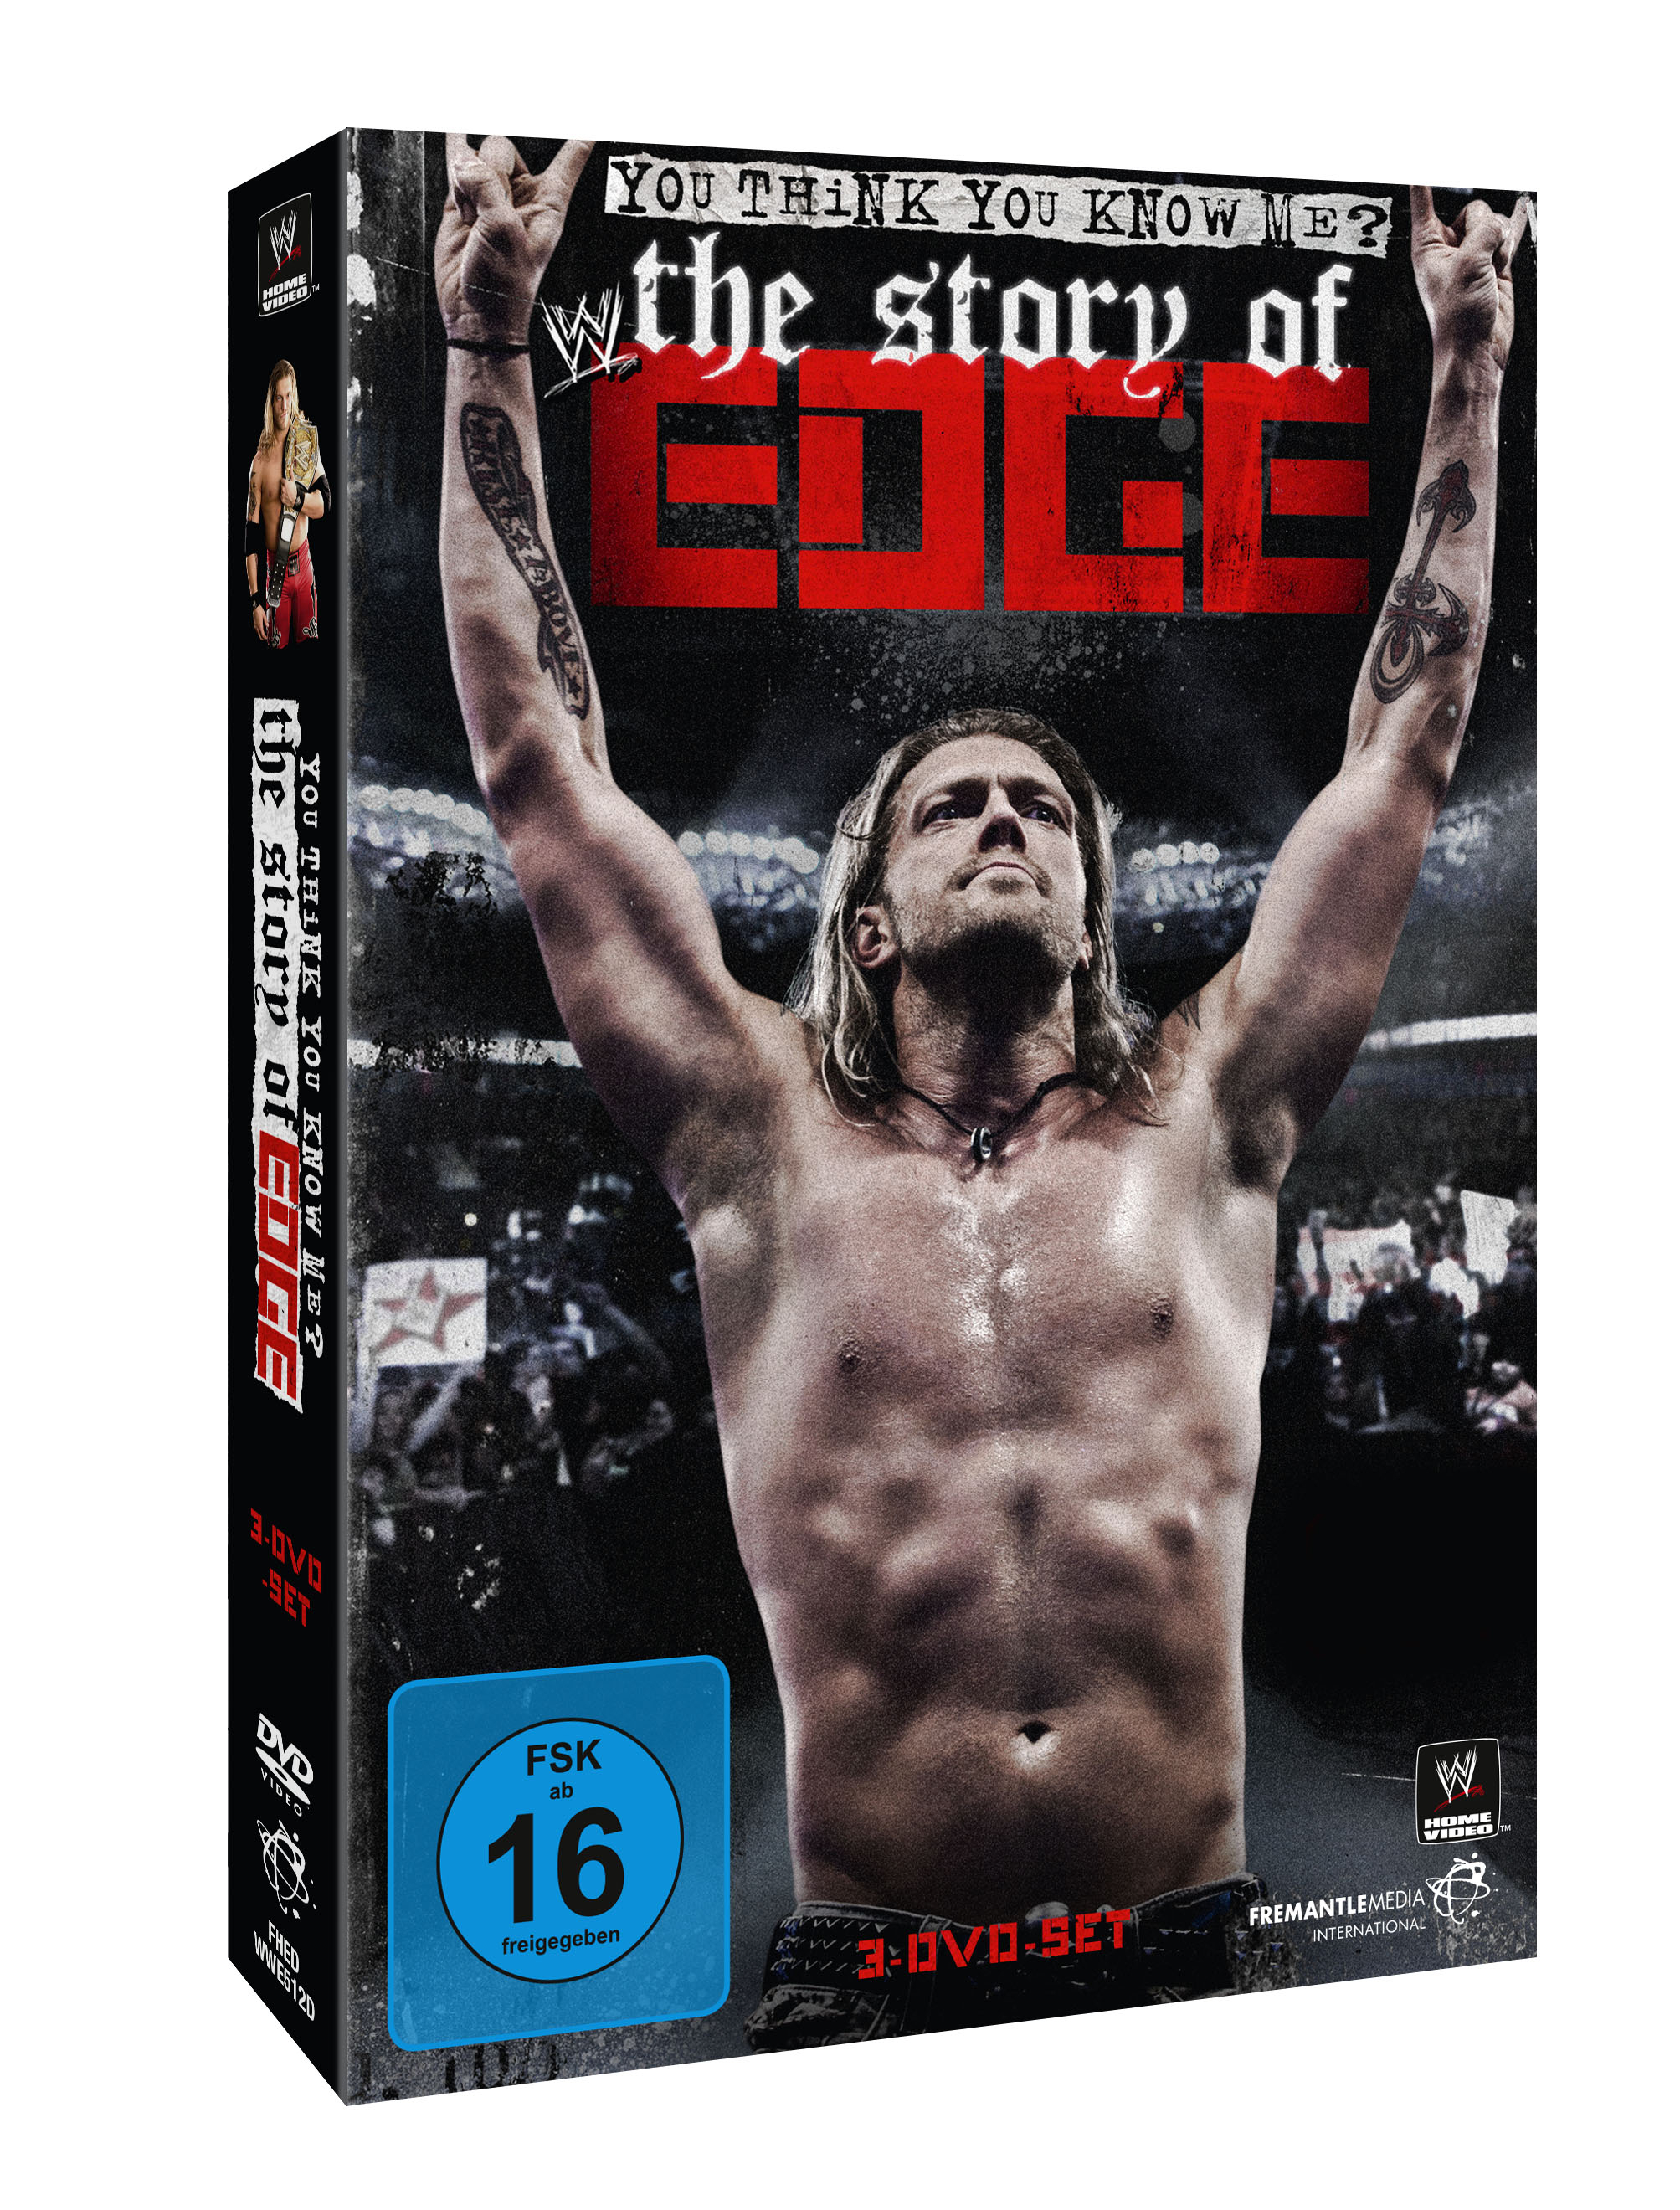 Know Me? DVD of You You Edge Story Think - WWE The